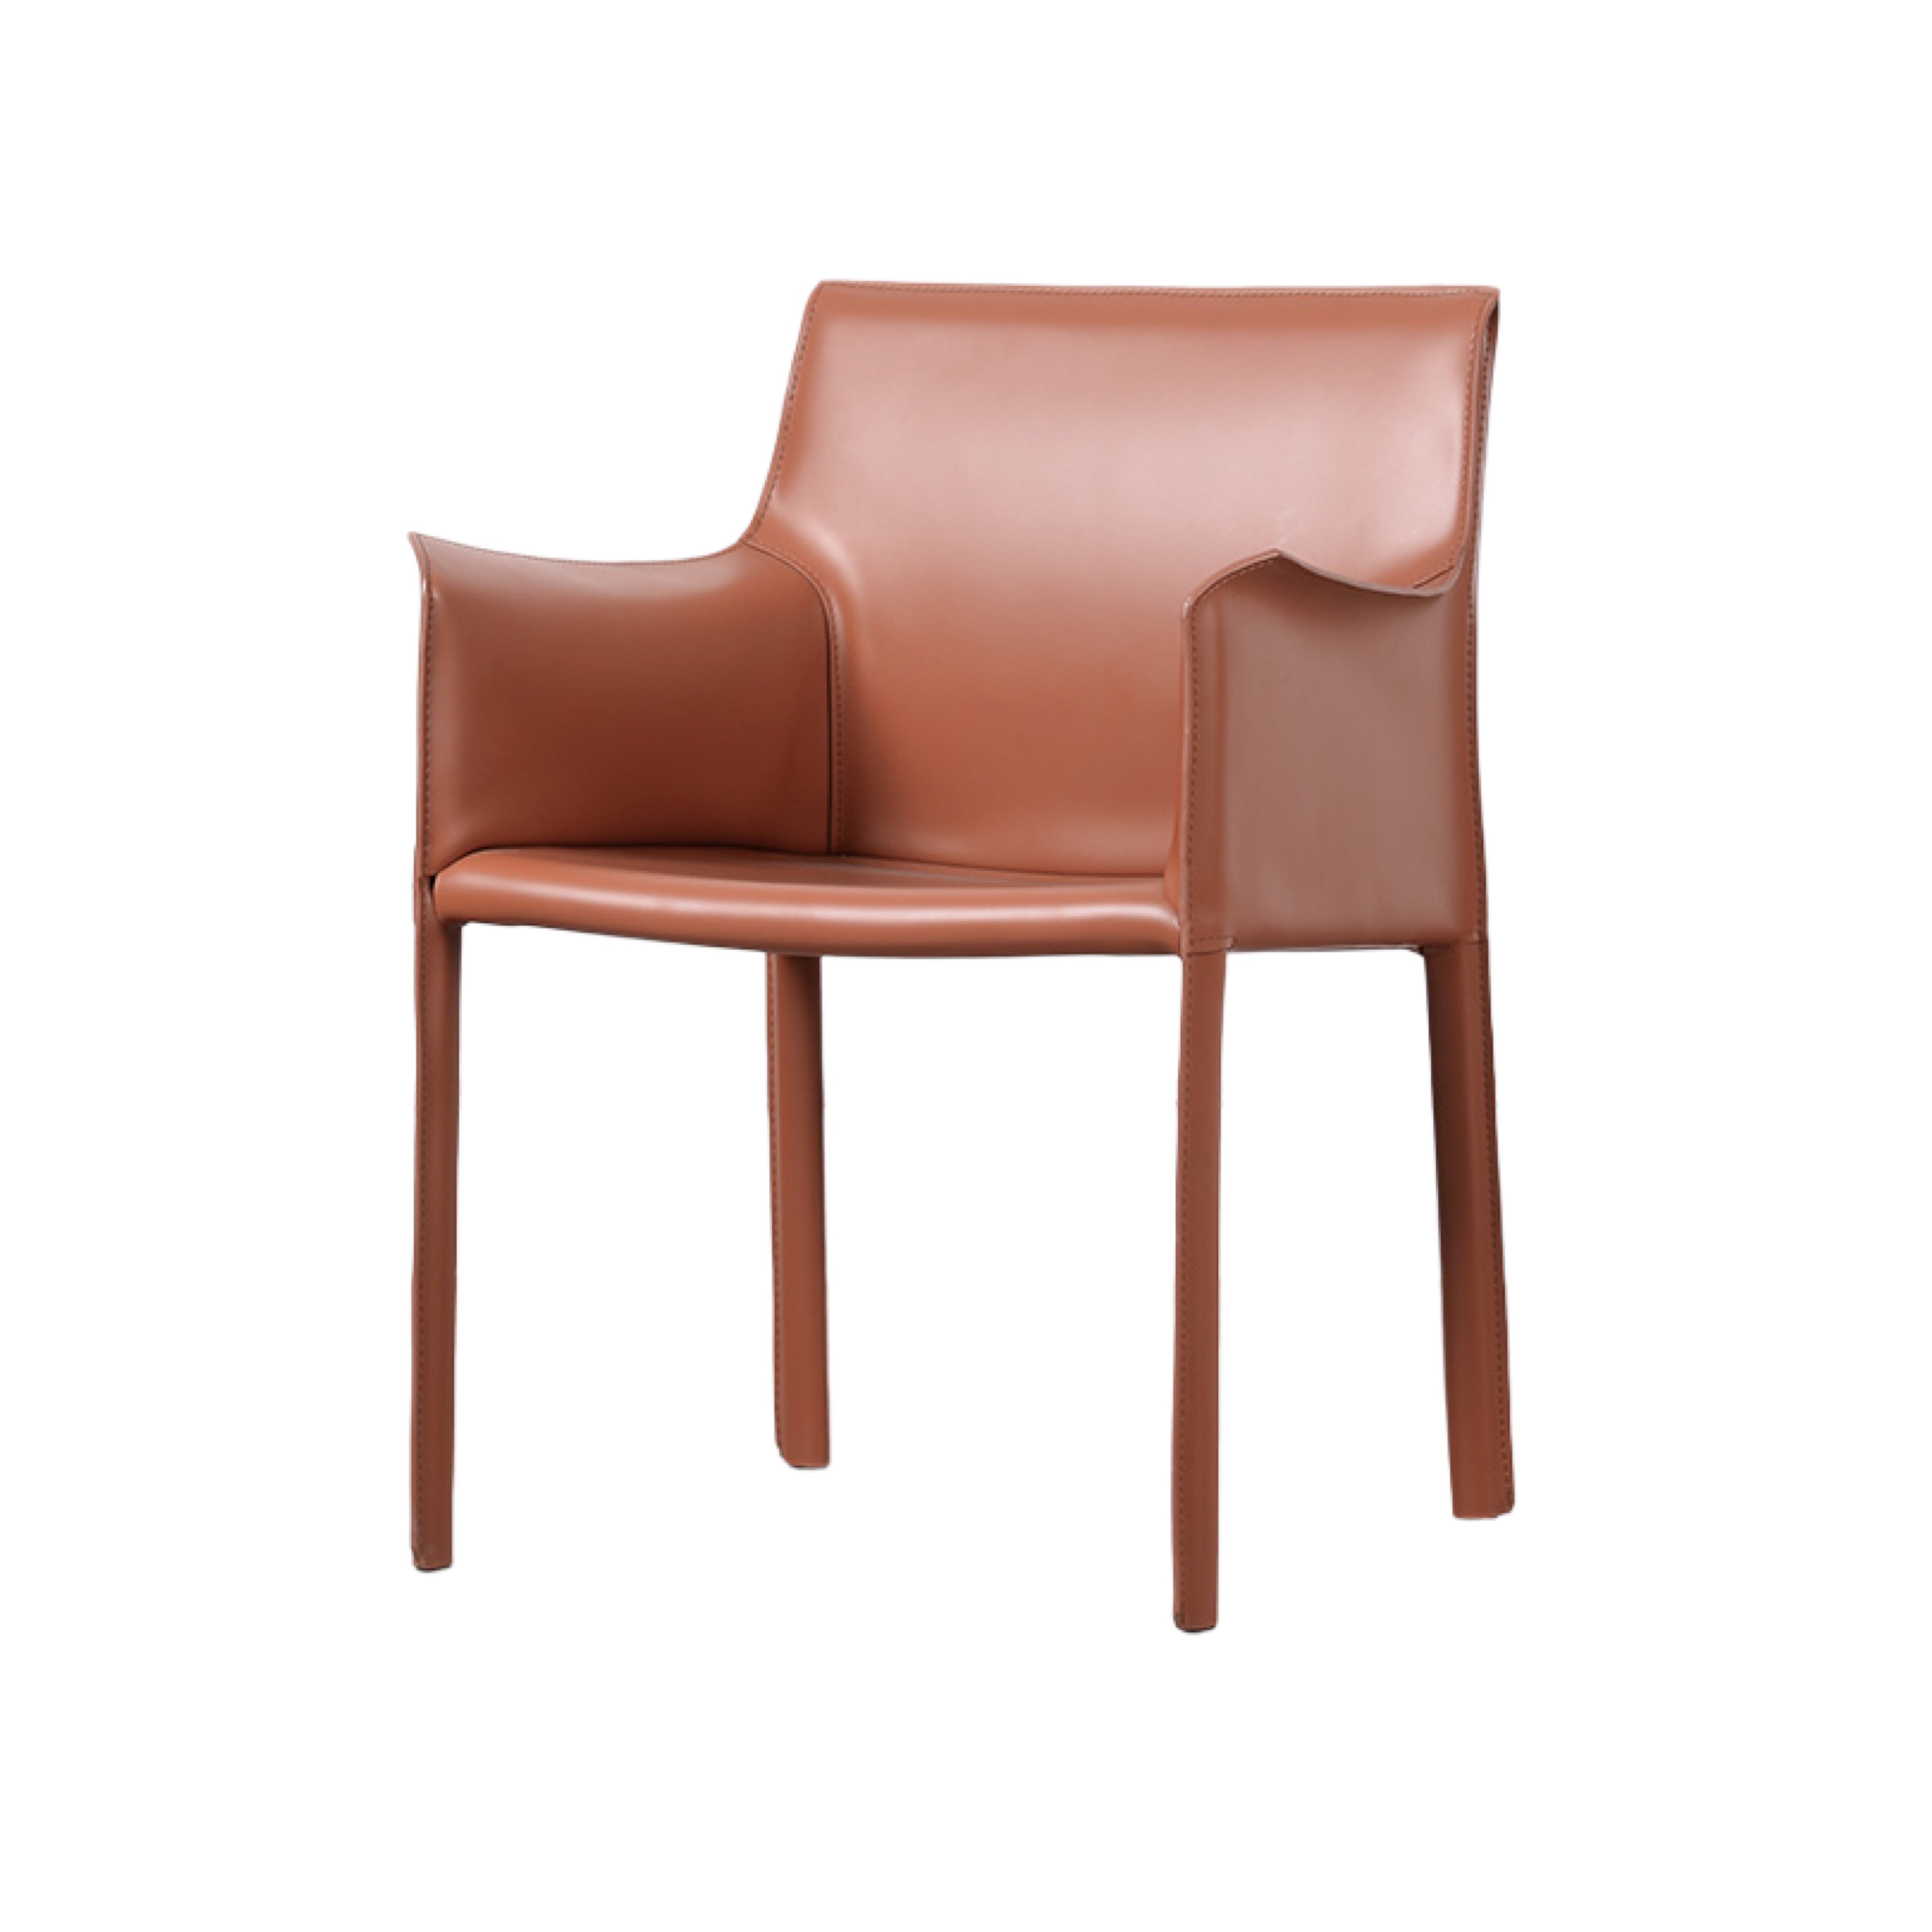 C-TR20039 Saddle Dining Chair